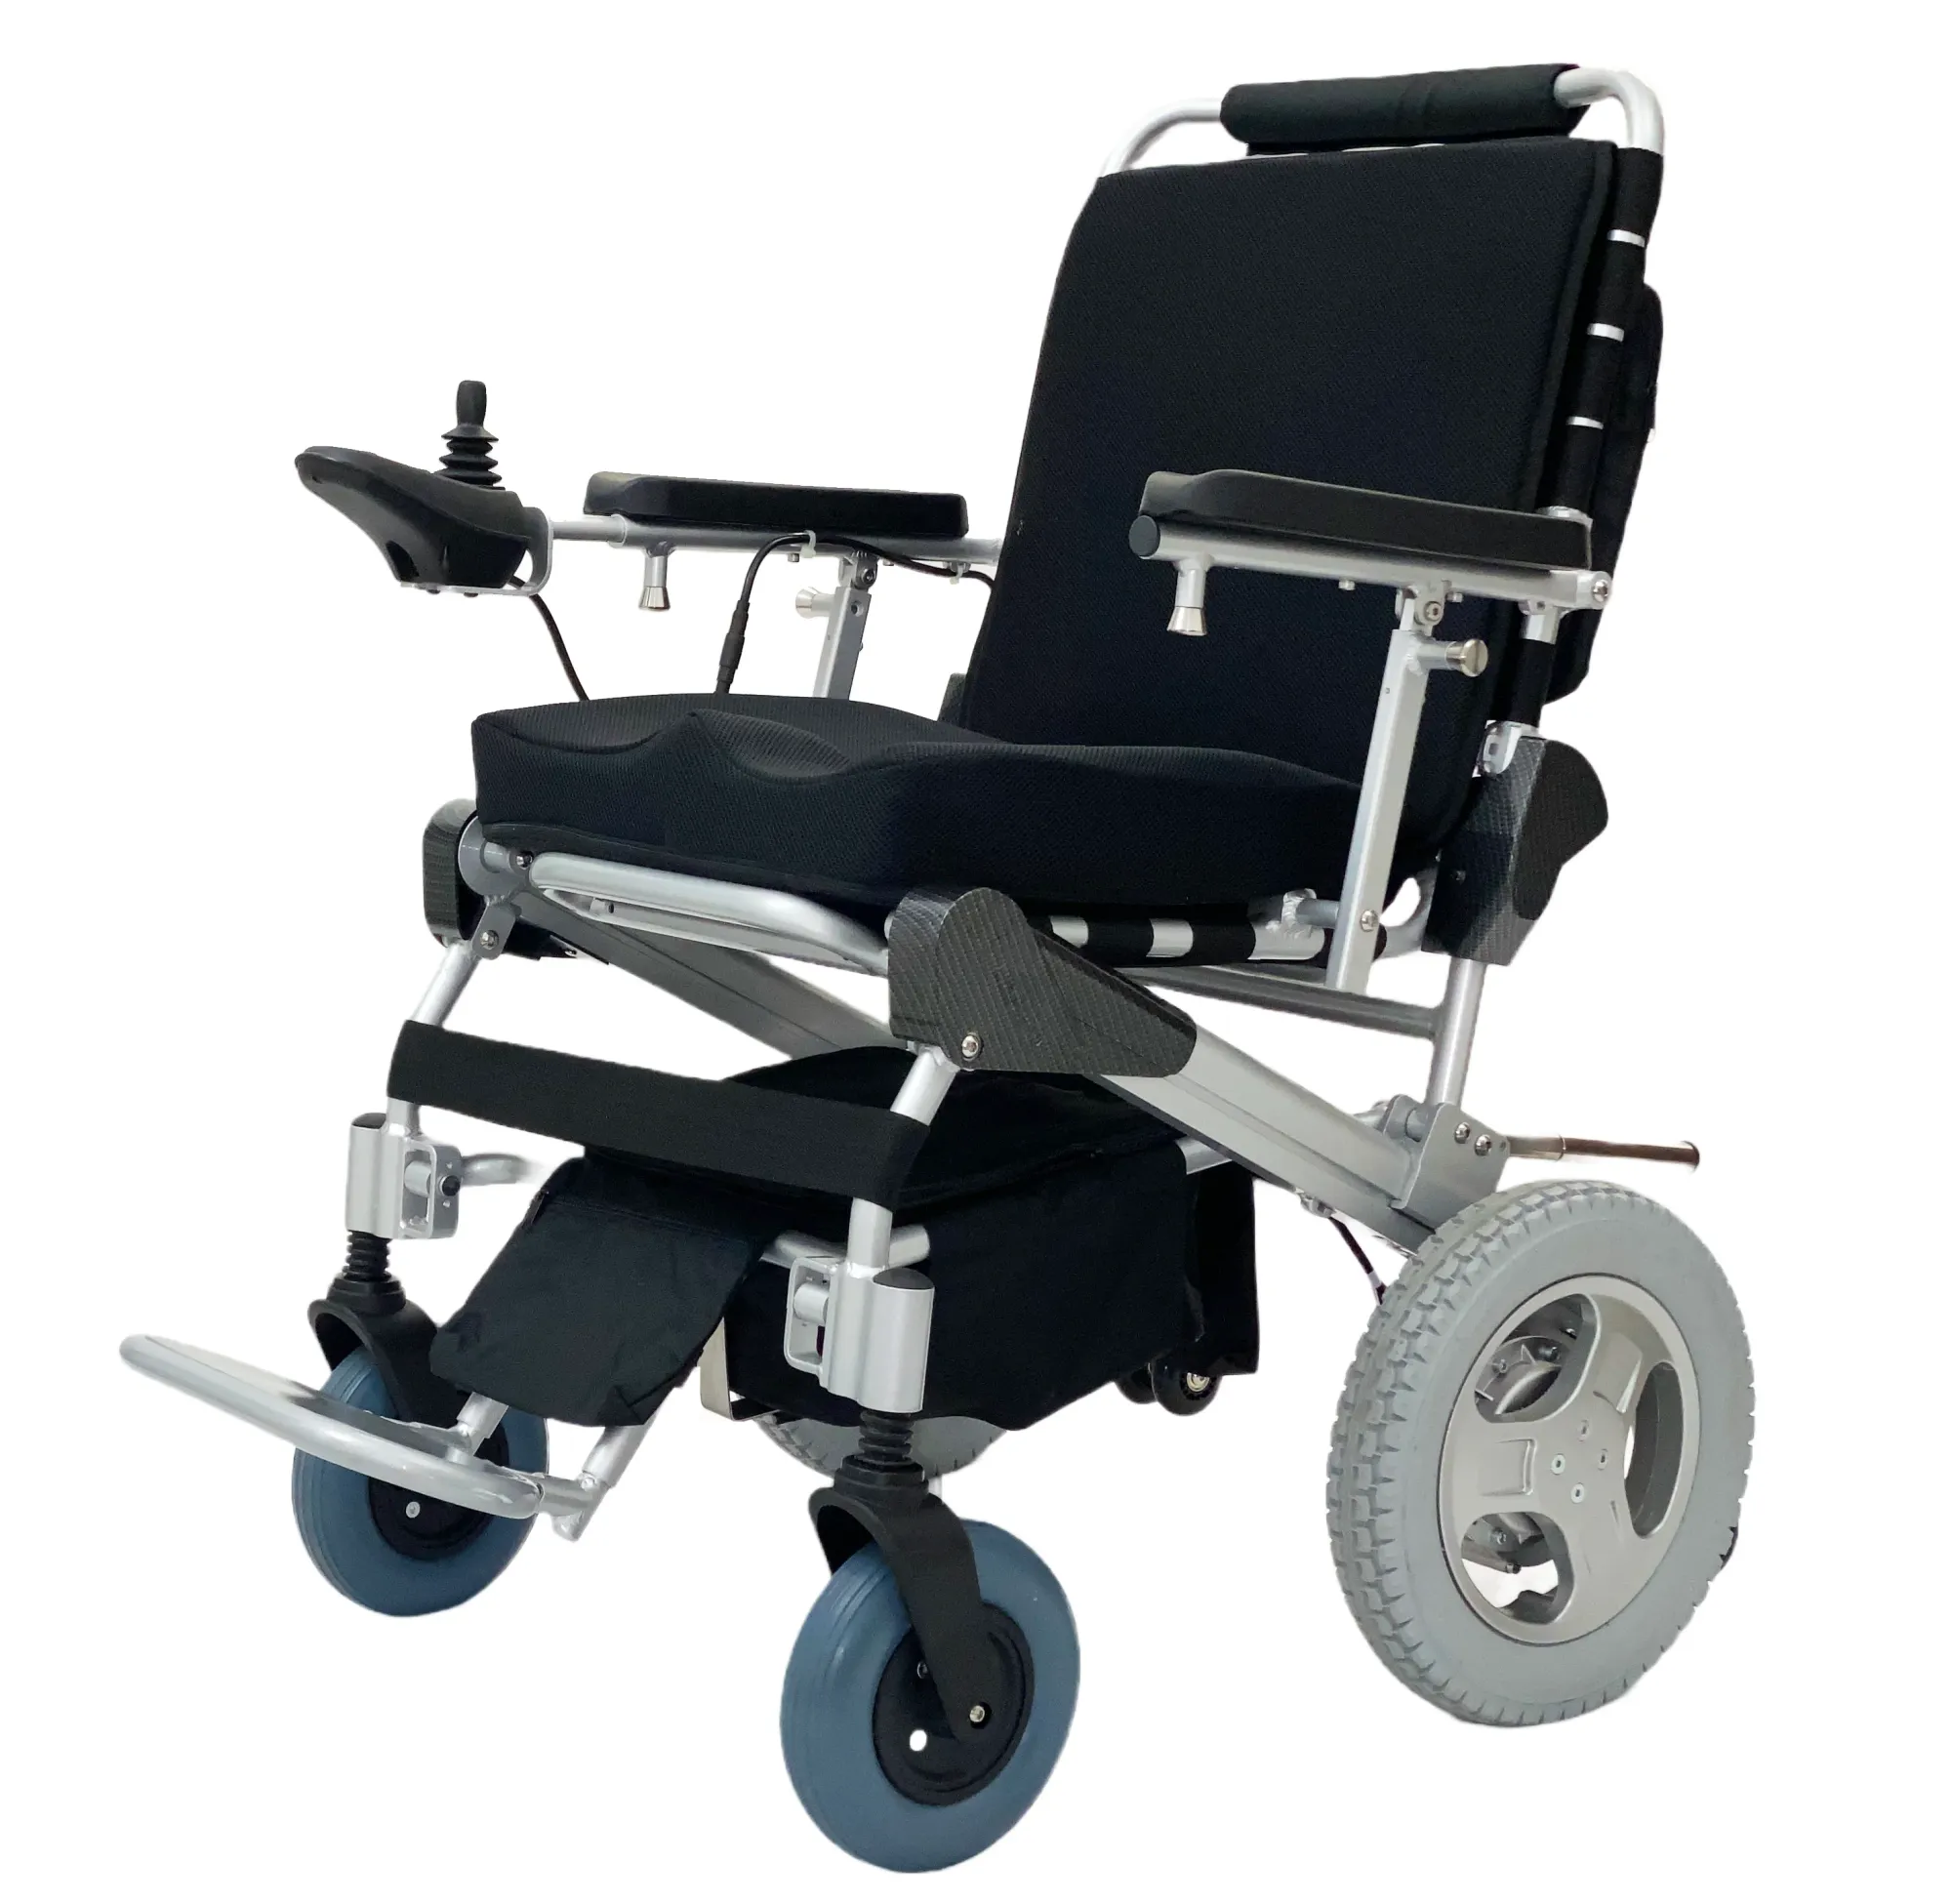 Best Power Wheelchair For Outdoor Use